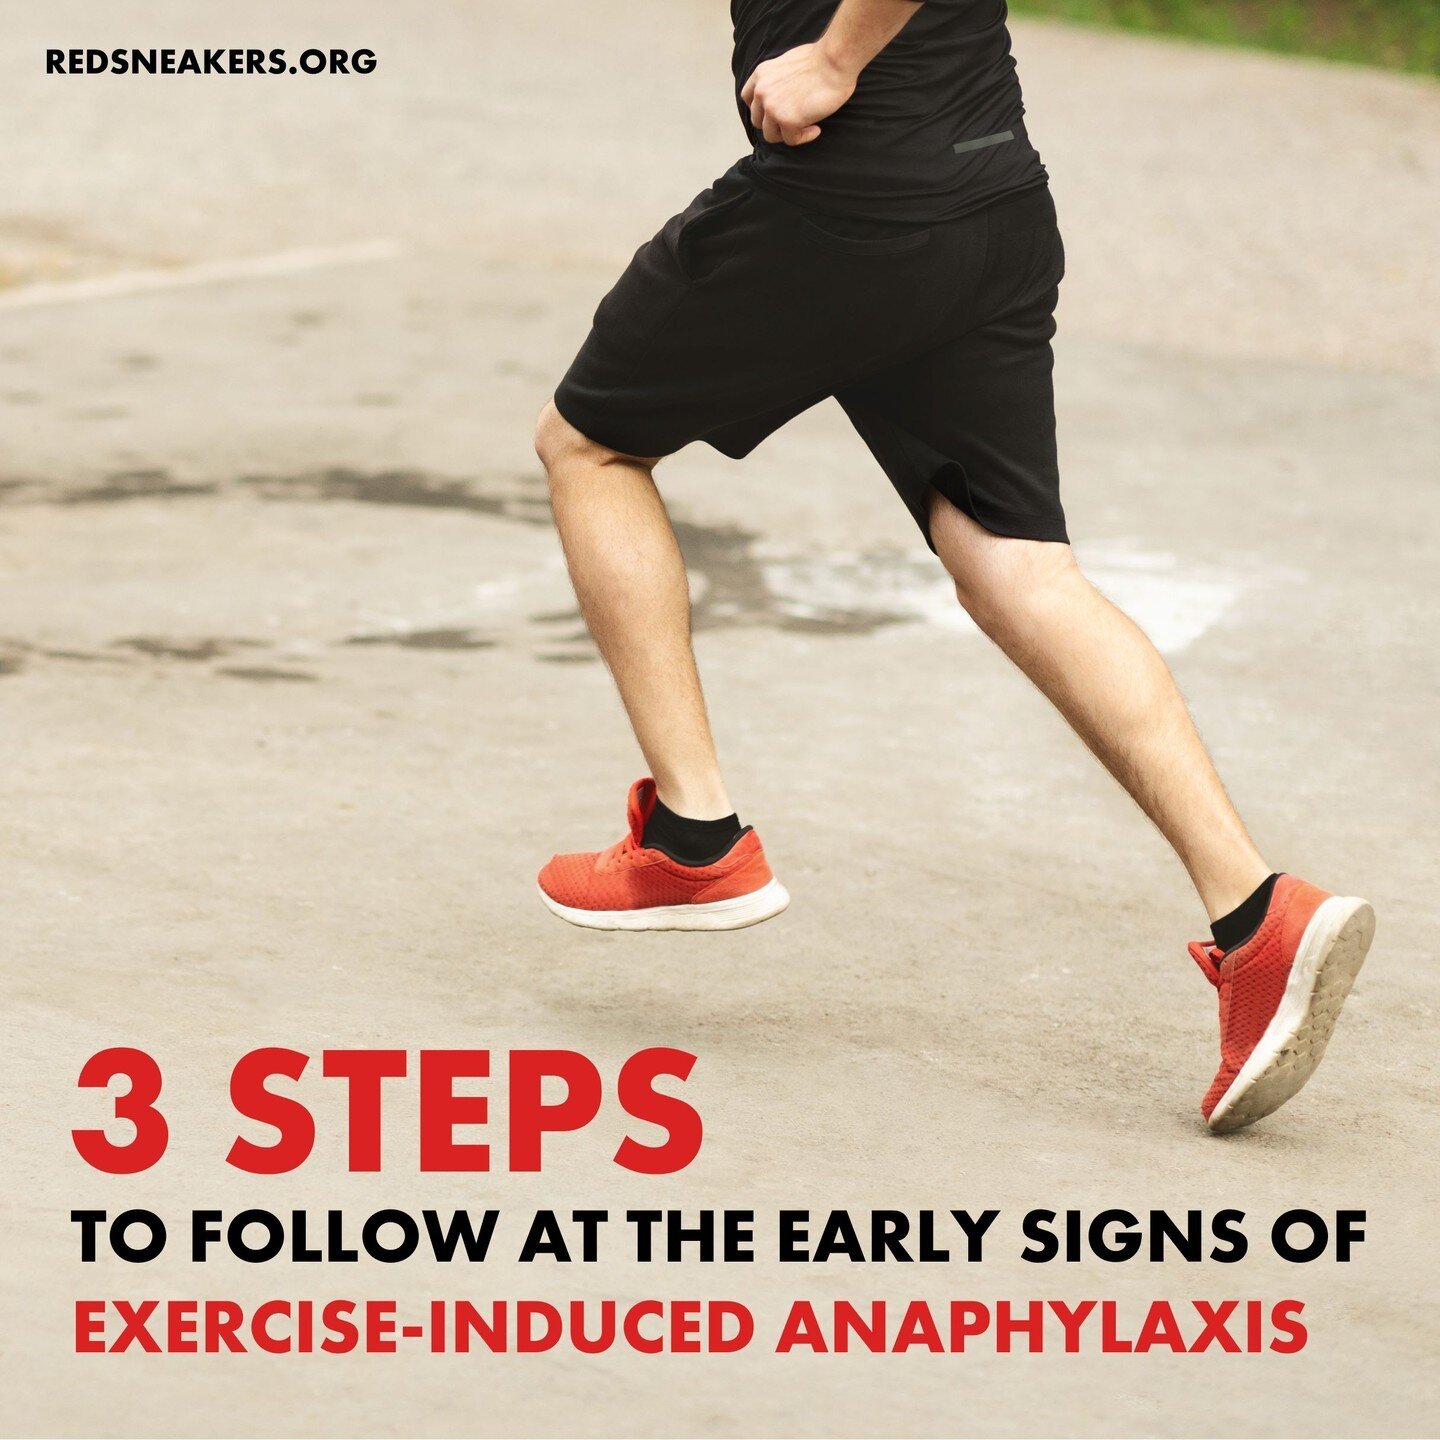 Exercise-Induced Anaphylaxis (EIA) is a rare condition in which an allergic reaction is triggered by physical activity, leading to the onset of anaphylaxis.

Though it is often associated with vigorous activities, EIA can occur during any physical ex